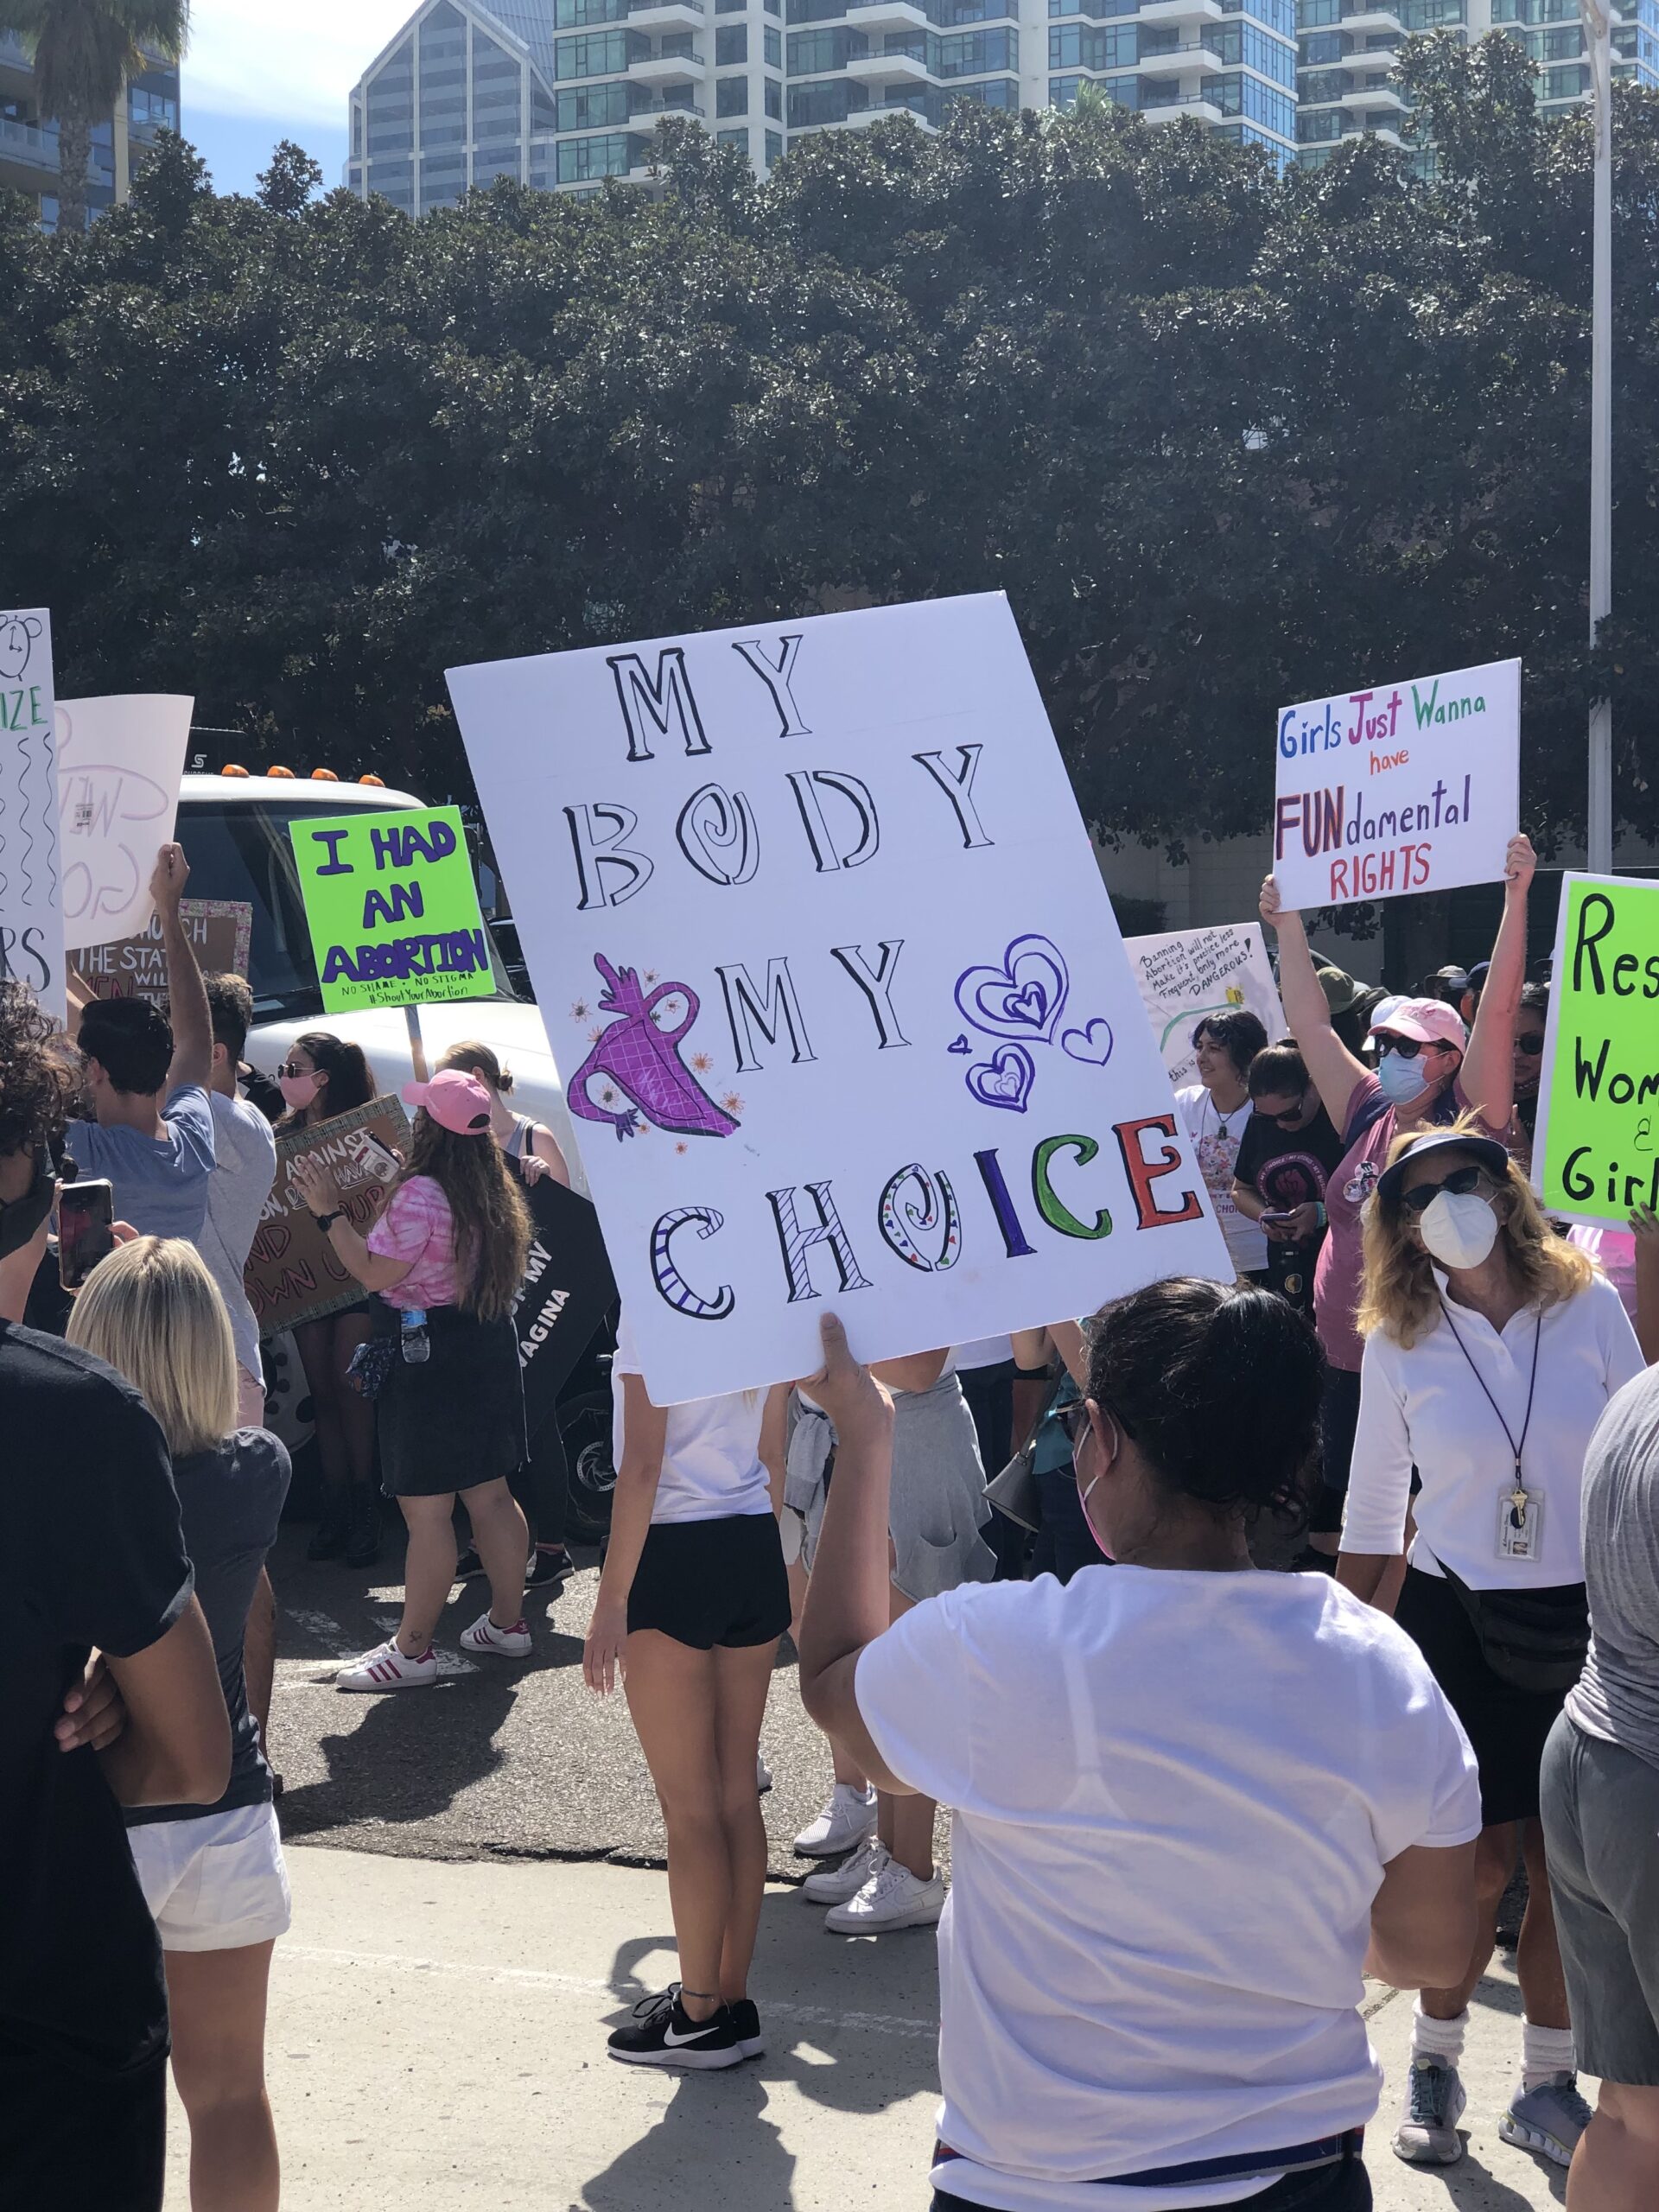 A group of women protests and carries signs in a park in downtown San Diego. The woman in front carries a sign that says, "MY BODY MY CHOICE."